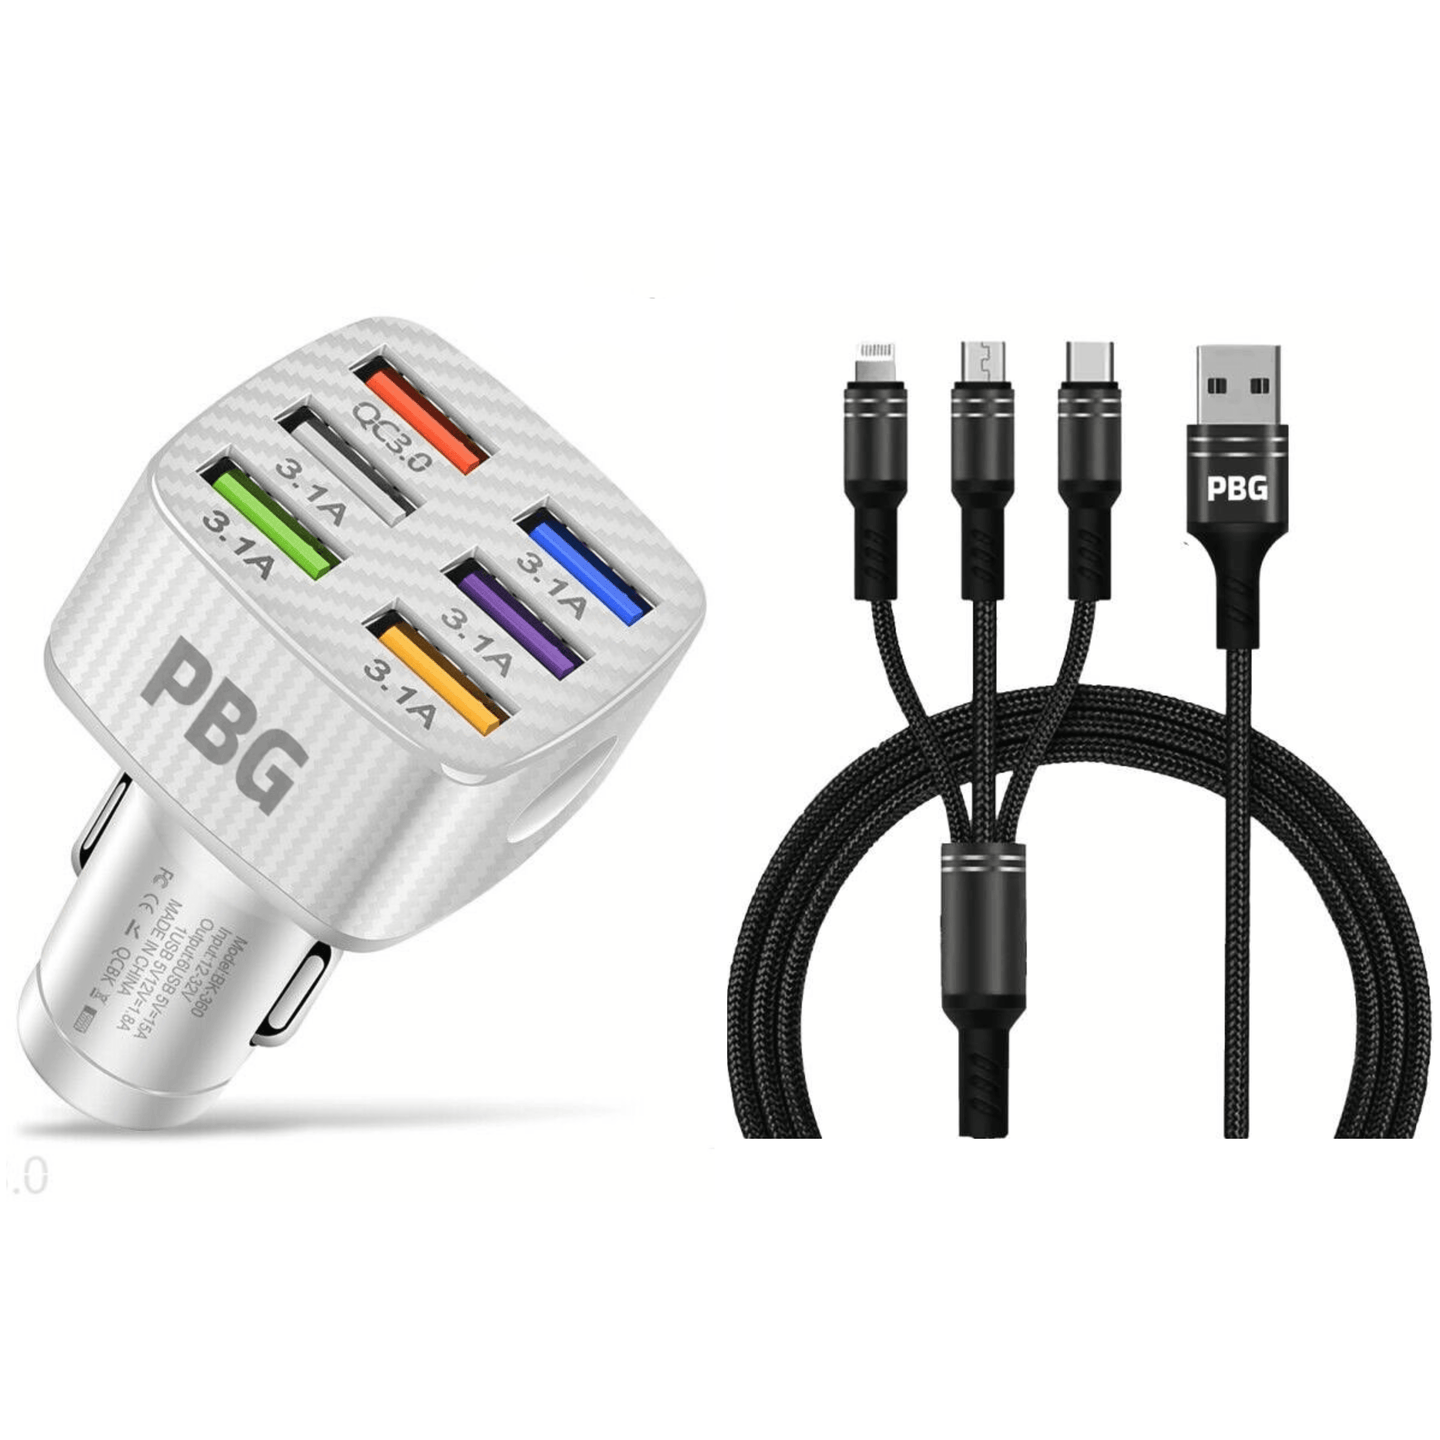 Black 4ft charging wire for iPhone and Android device with car charger 3.1 6 ports